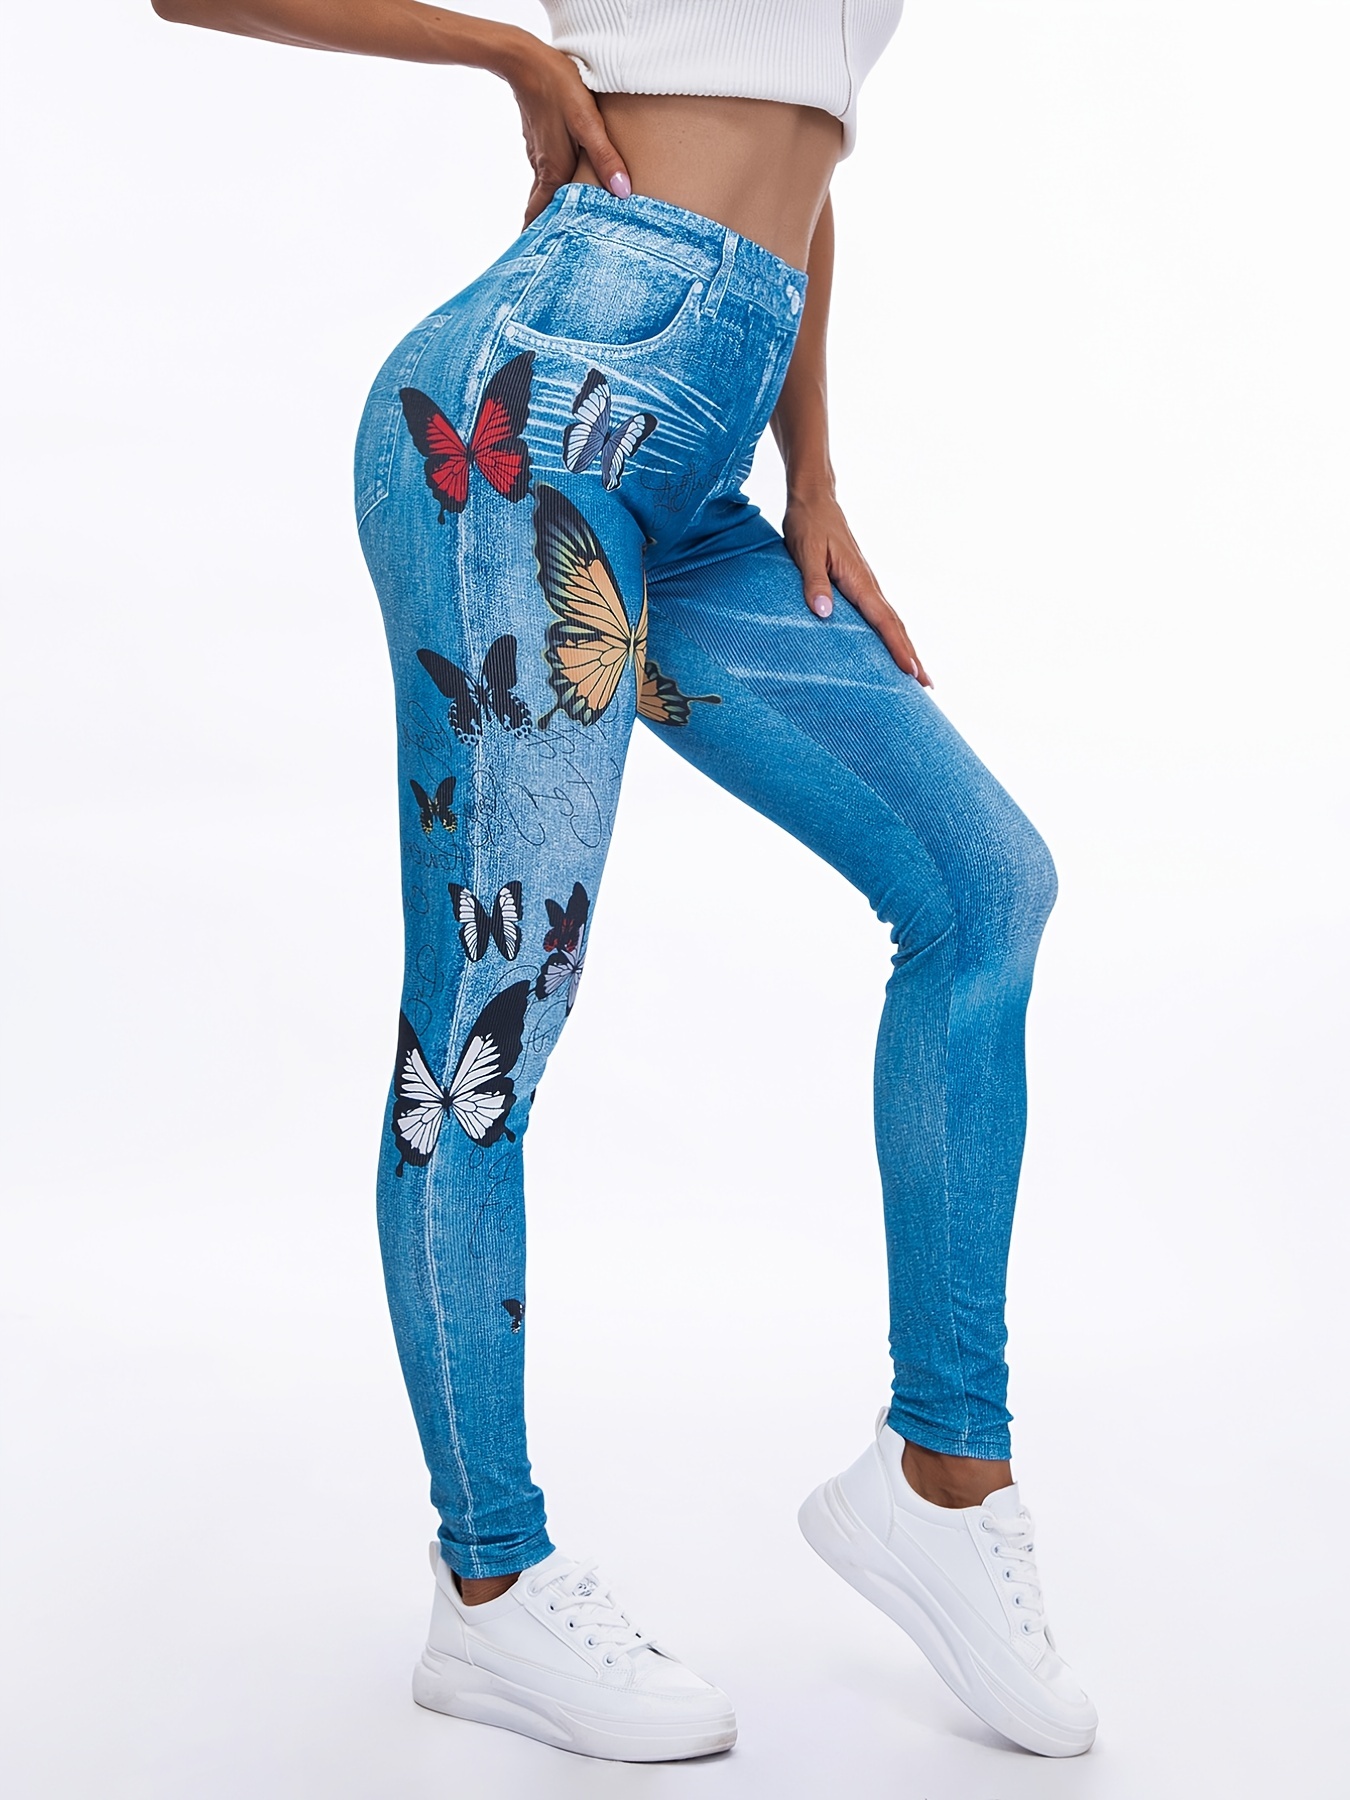 Blue Watercolor Leggings for Women, High Waisted Workout Pants